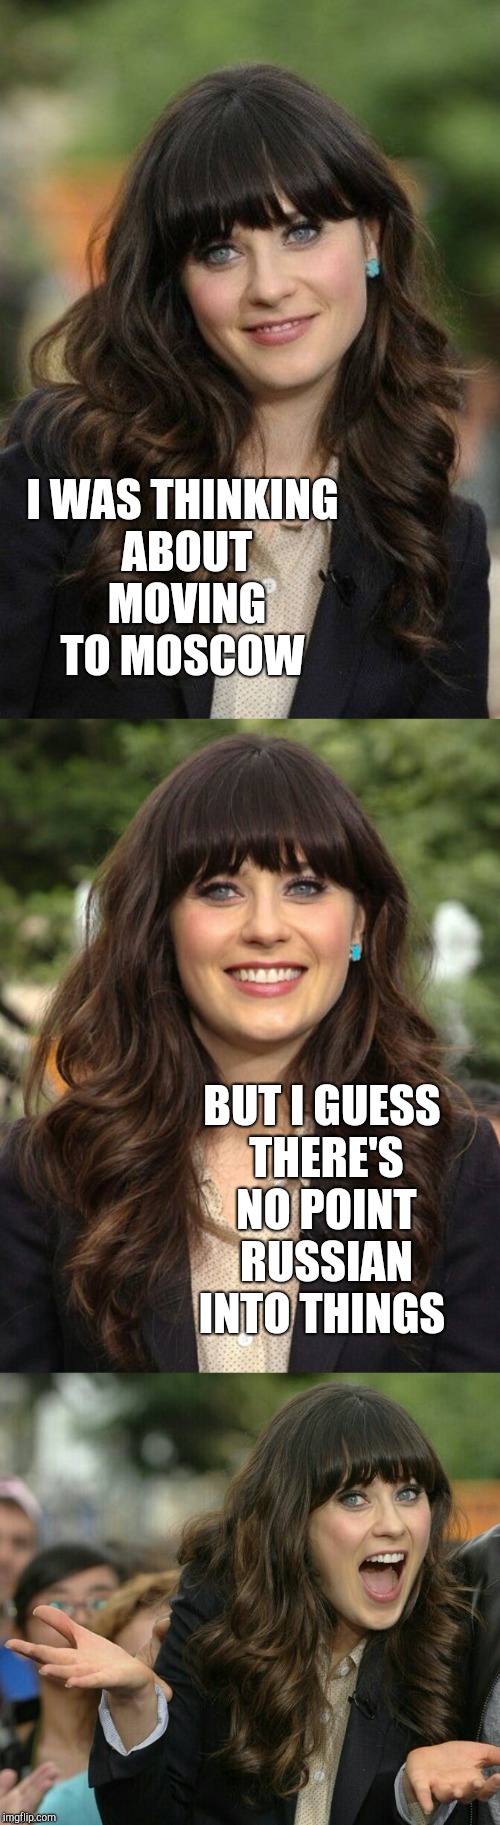 Zooey Deschanel joke template.  | I WAS THINKING ABOUT MOVING TO MOSCOW; BUT I GUESS THERE'S NO POINT RUSSIAN INTO THINGS | image tagged in zooey deschanel joke template,jbmemegeek,zooey deschanel,bad puns,russia | made w/ Imgflip meme maker